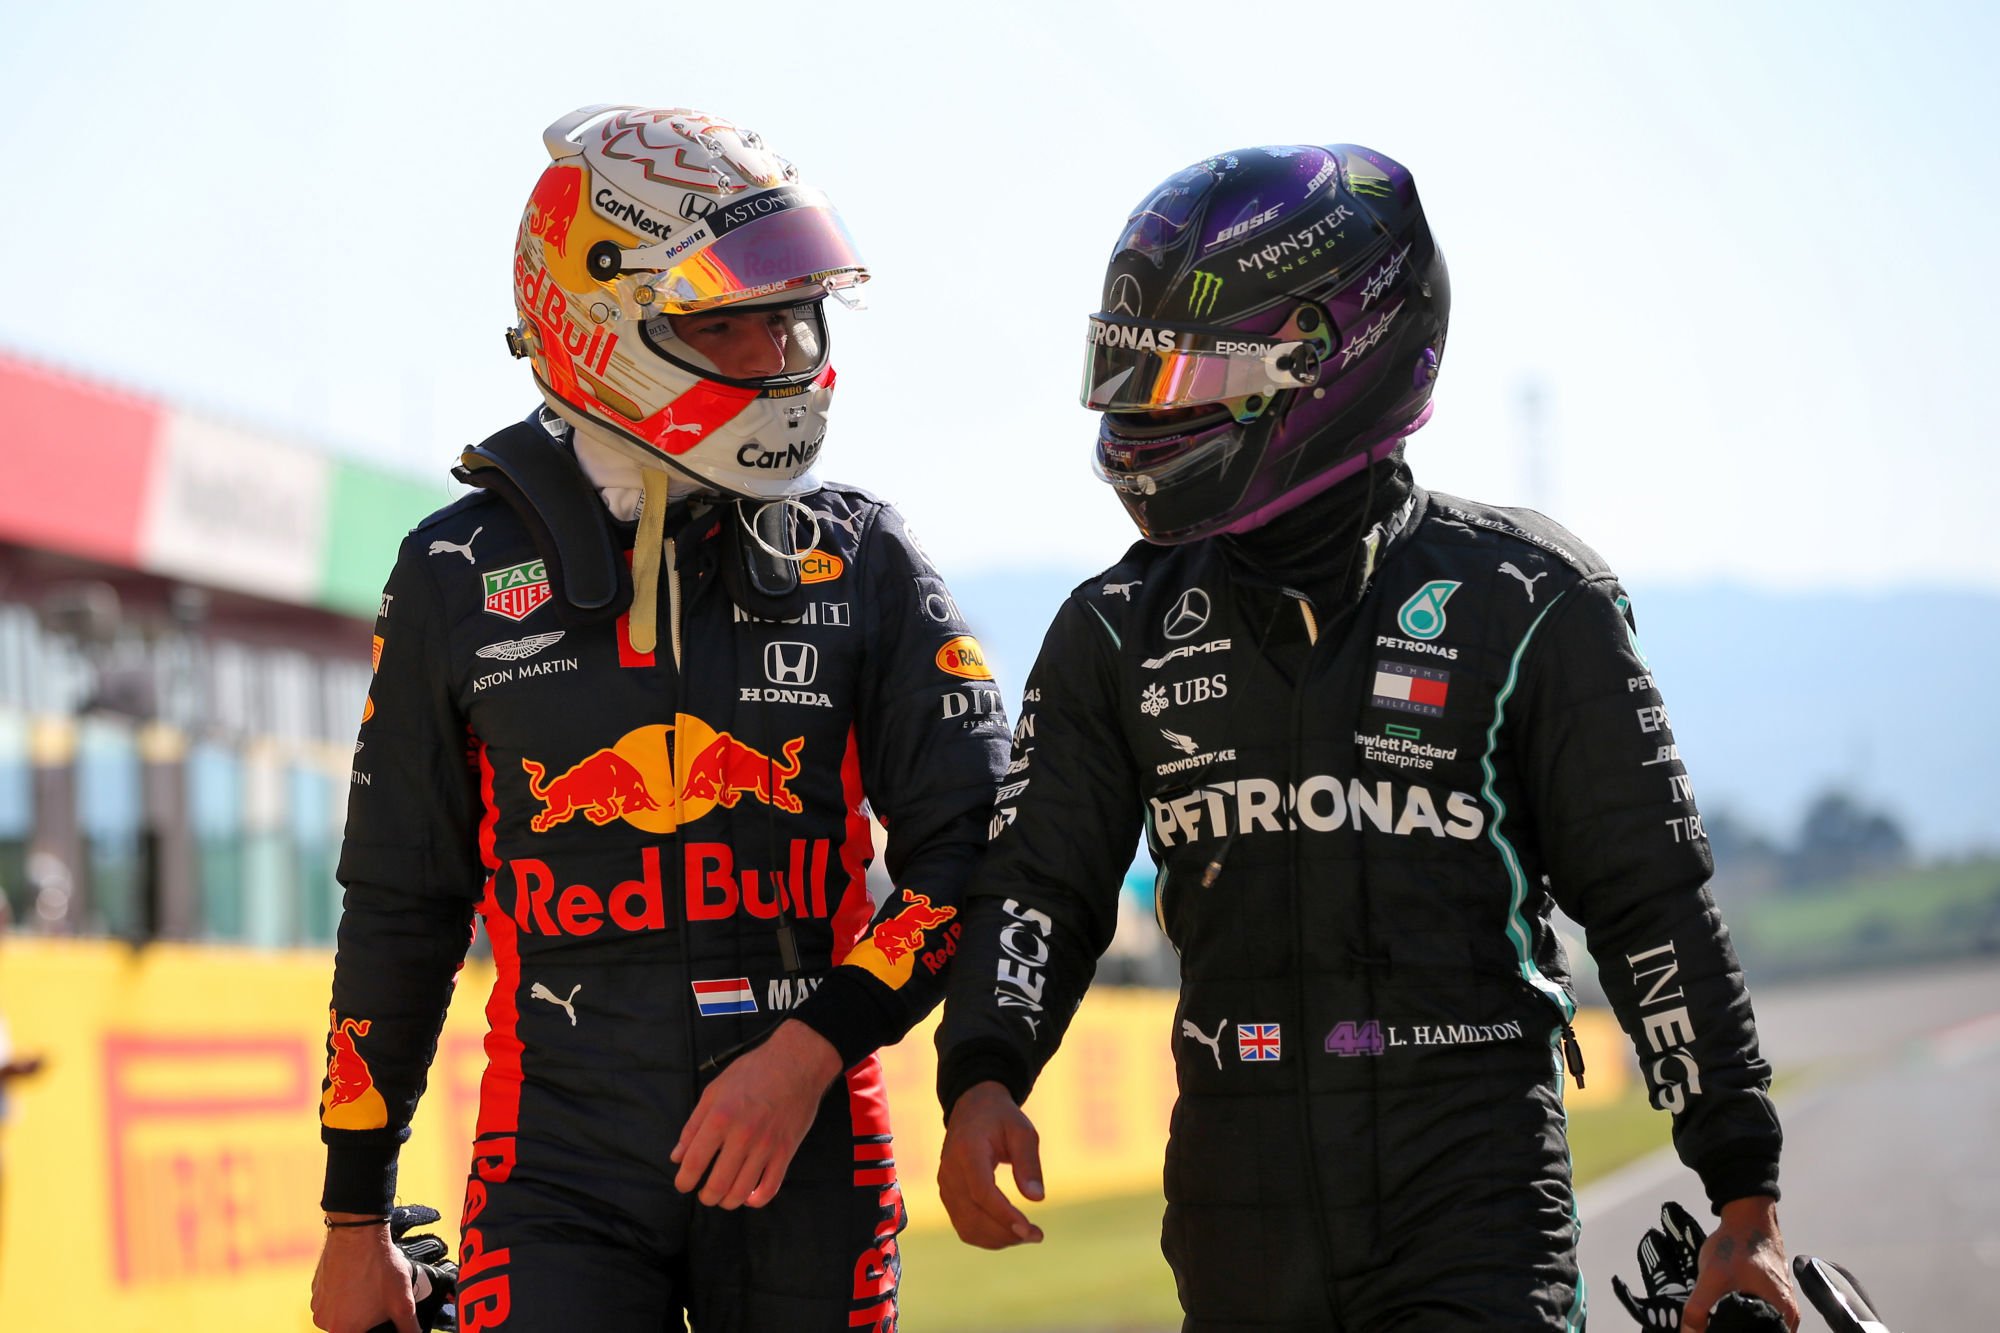 Max Verstappen - Red Bull Racing et Lewis Hamilton - Mercedes AMG F1 
By Icon Sport